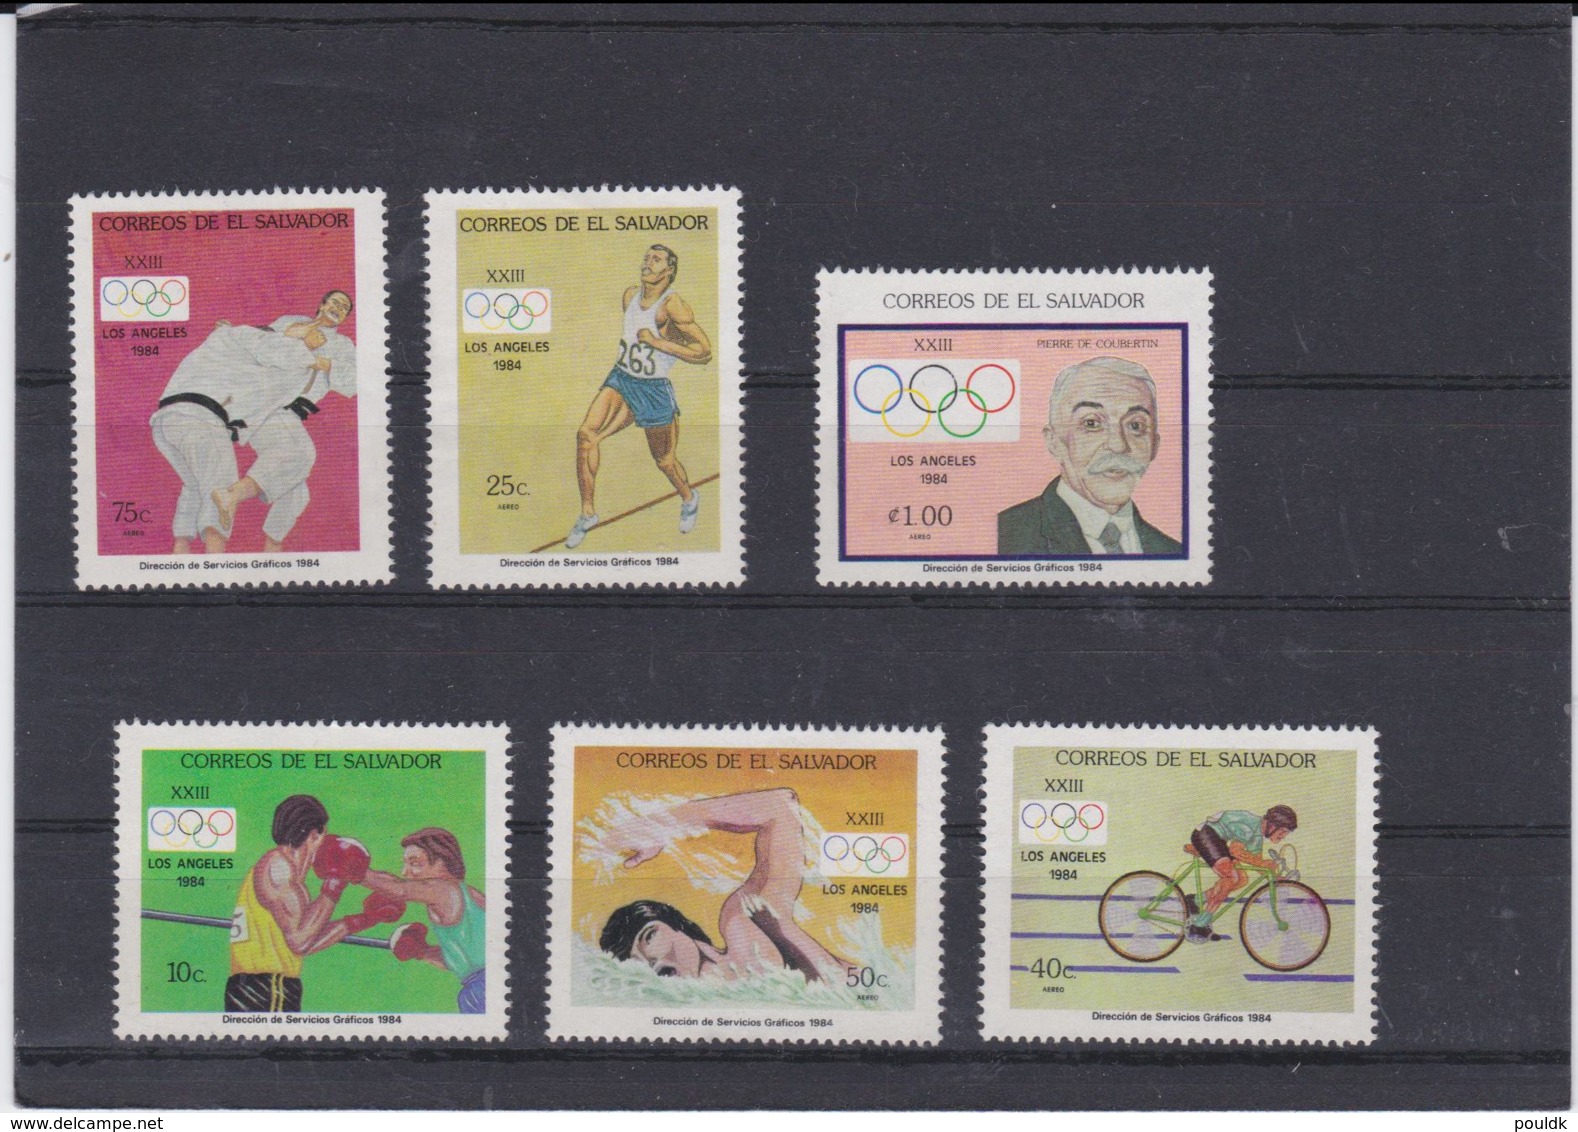 El Salvador 1984 Los Angeles Olympic Games 6 Stamps - MNH/** (H59) - Sommer 1984: Los Angeles